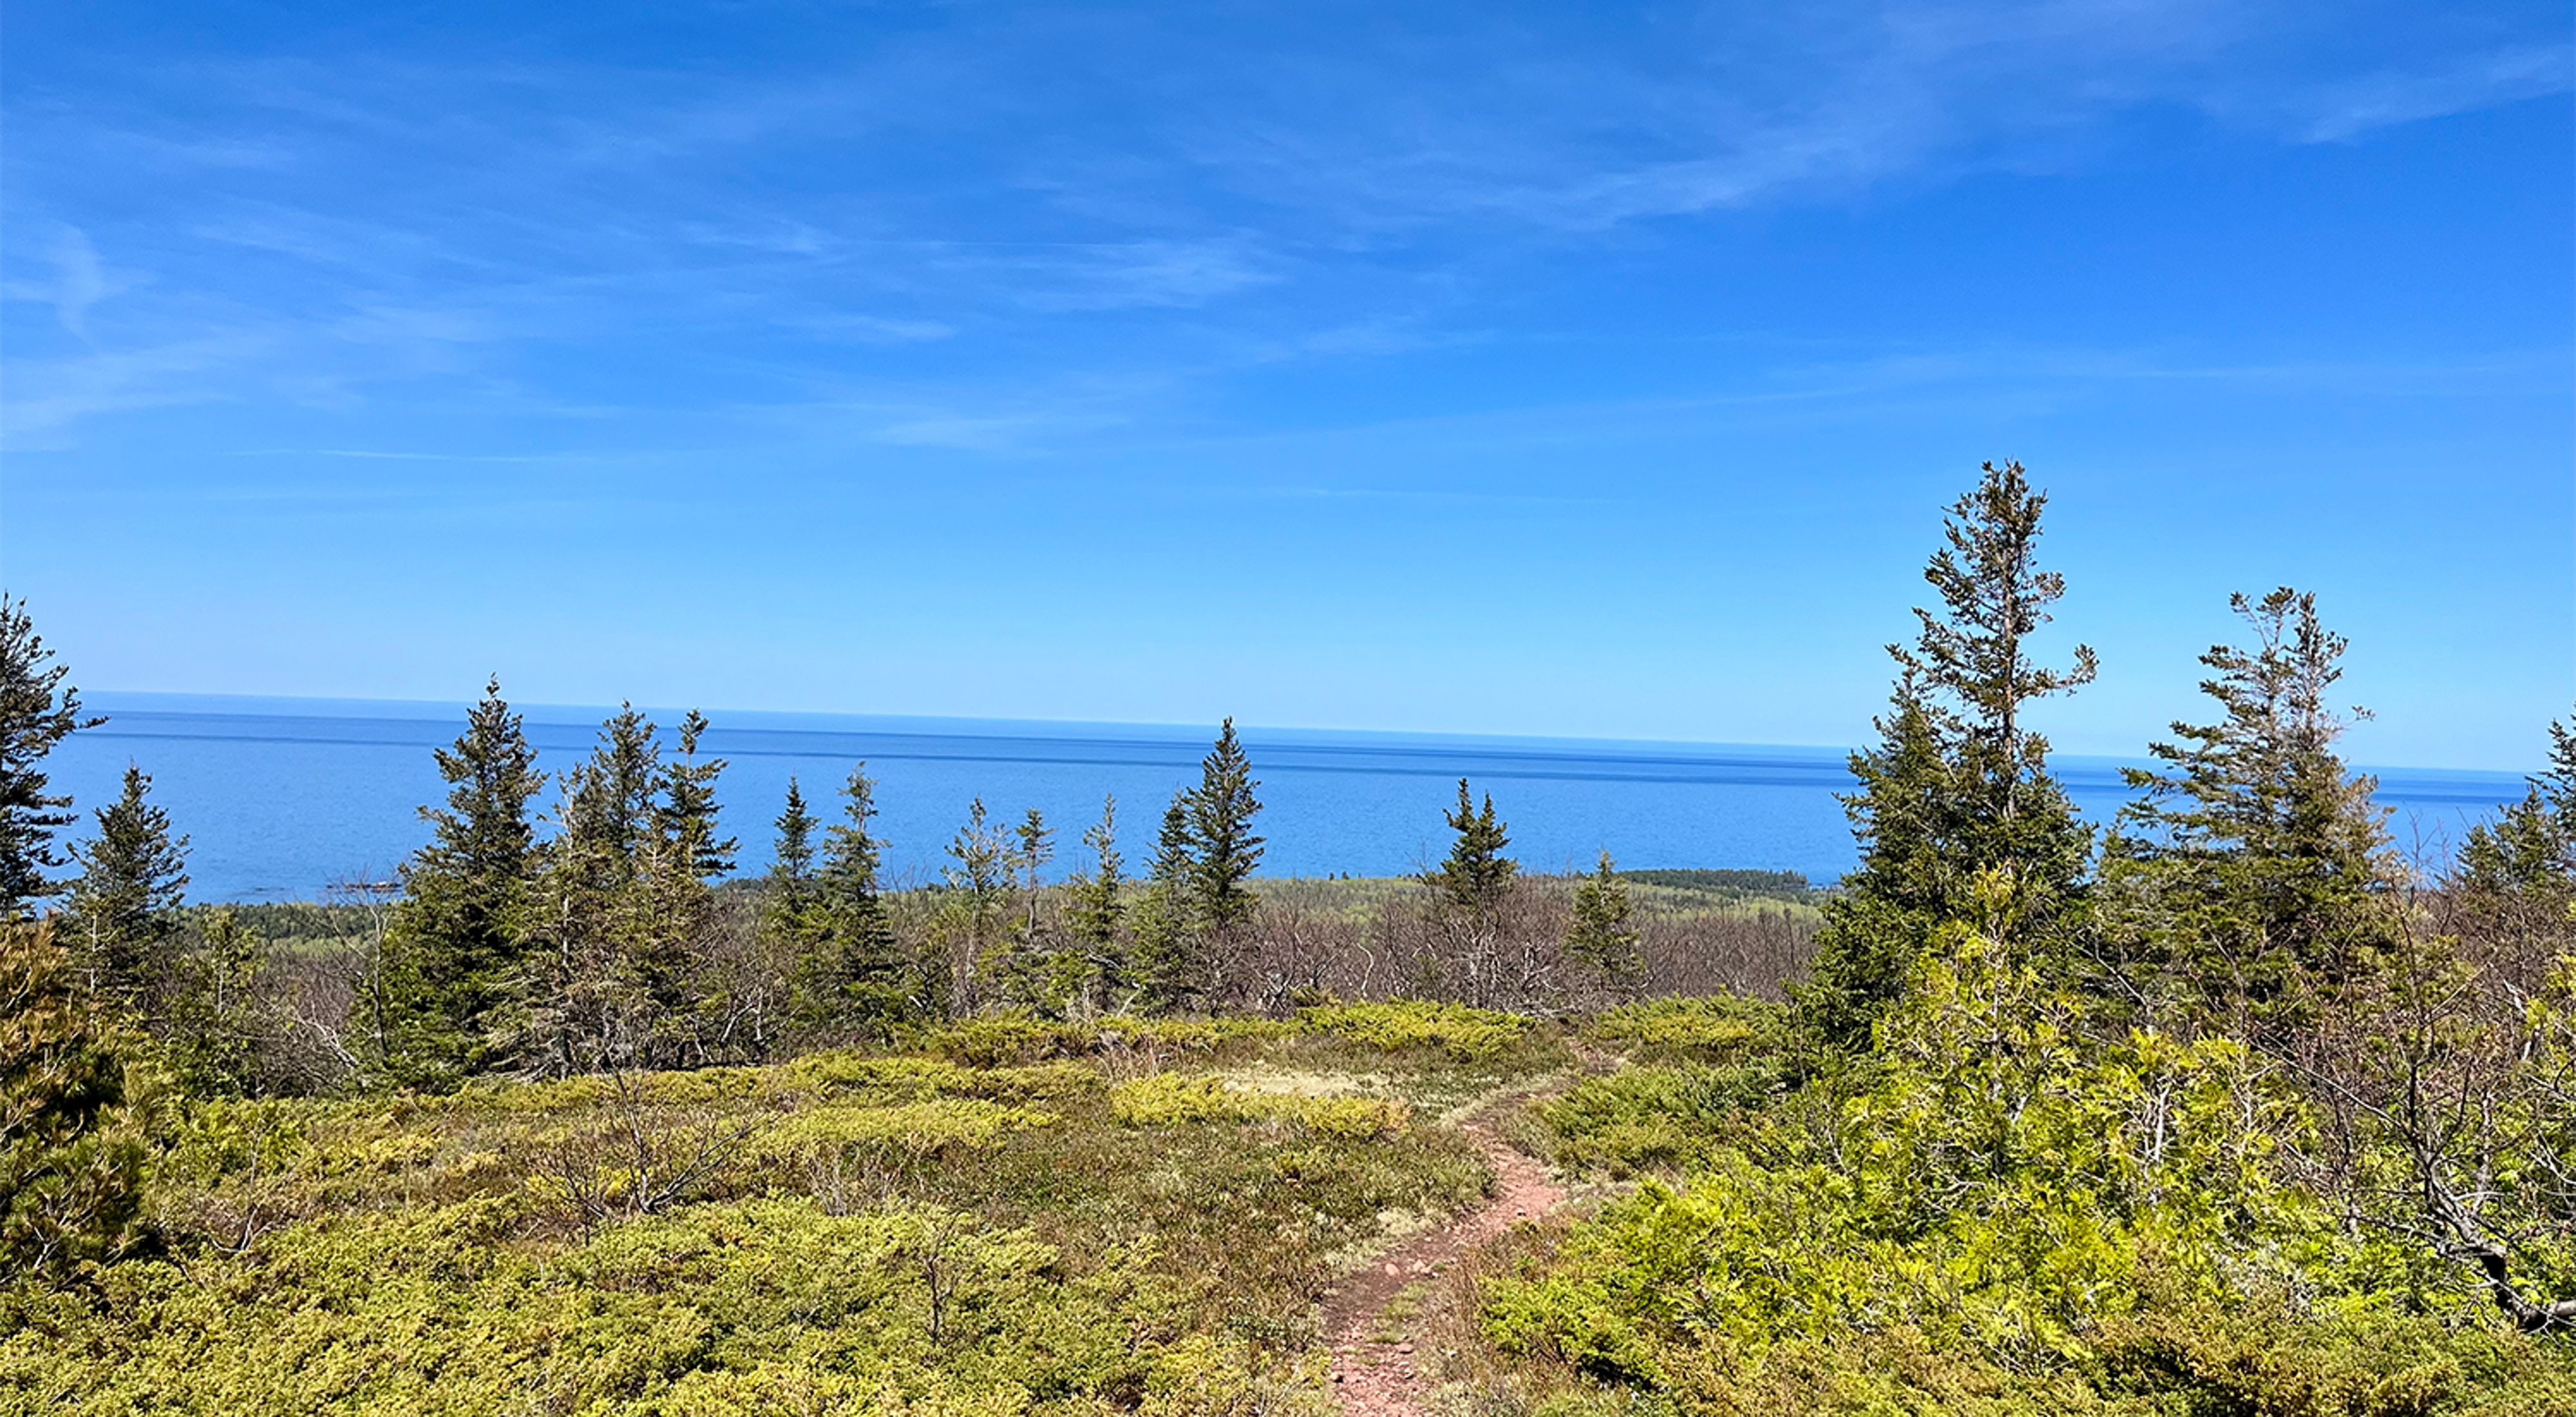 The view of a forest and bright blue lake from the top of Mt. Baldy at the Helmut and Candis Stern Preserve in the Upper Peninsula.